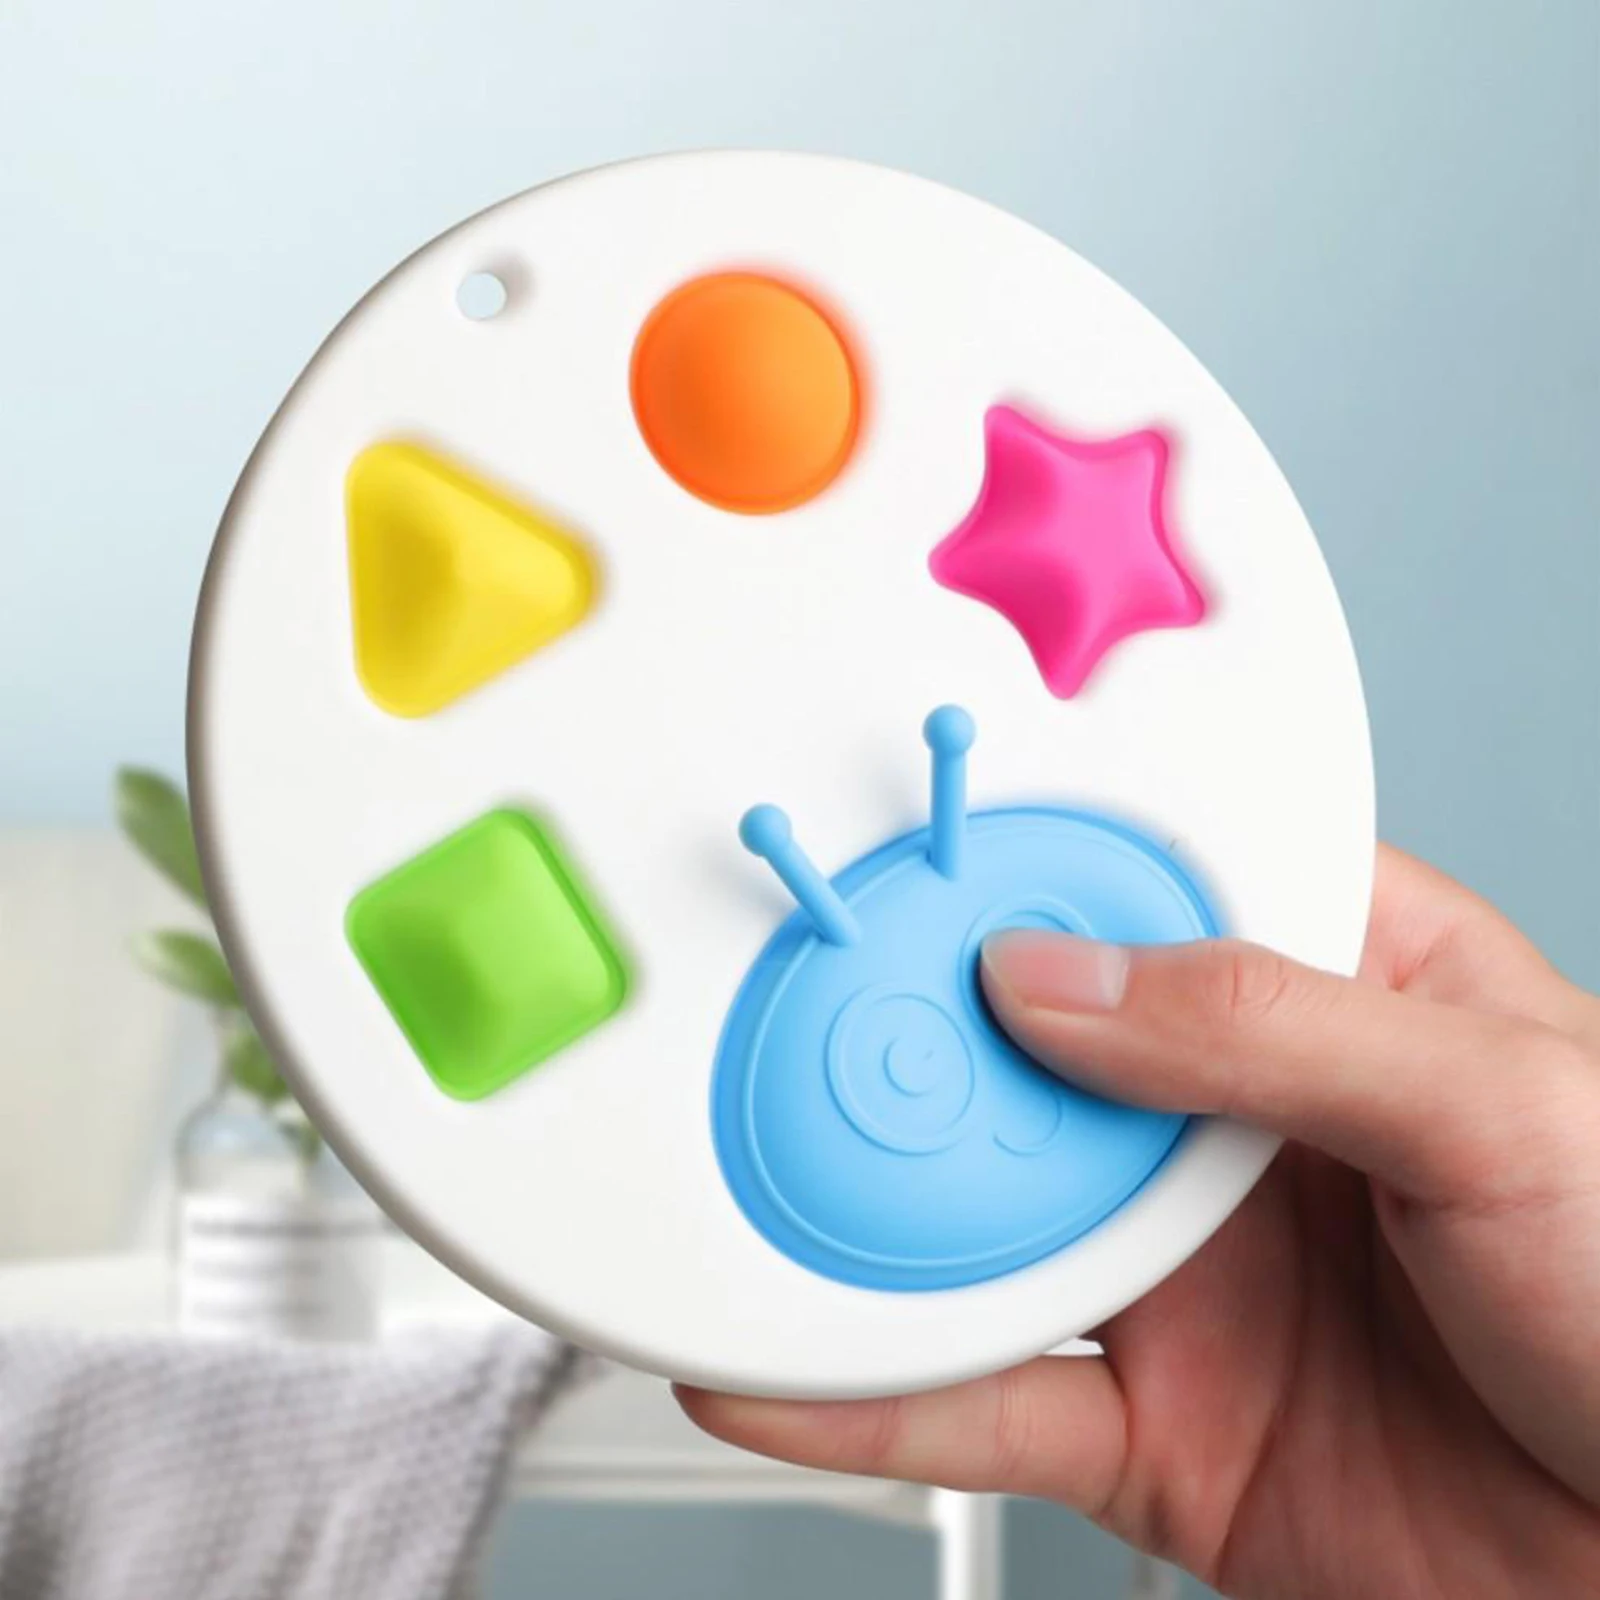 Round Sensory  Toy Silicone Baby Infant Educational Toy Ages 0-3 Years